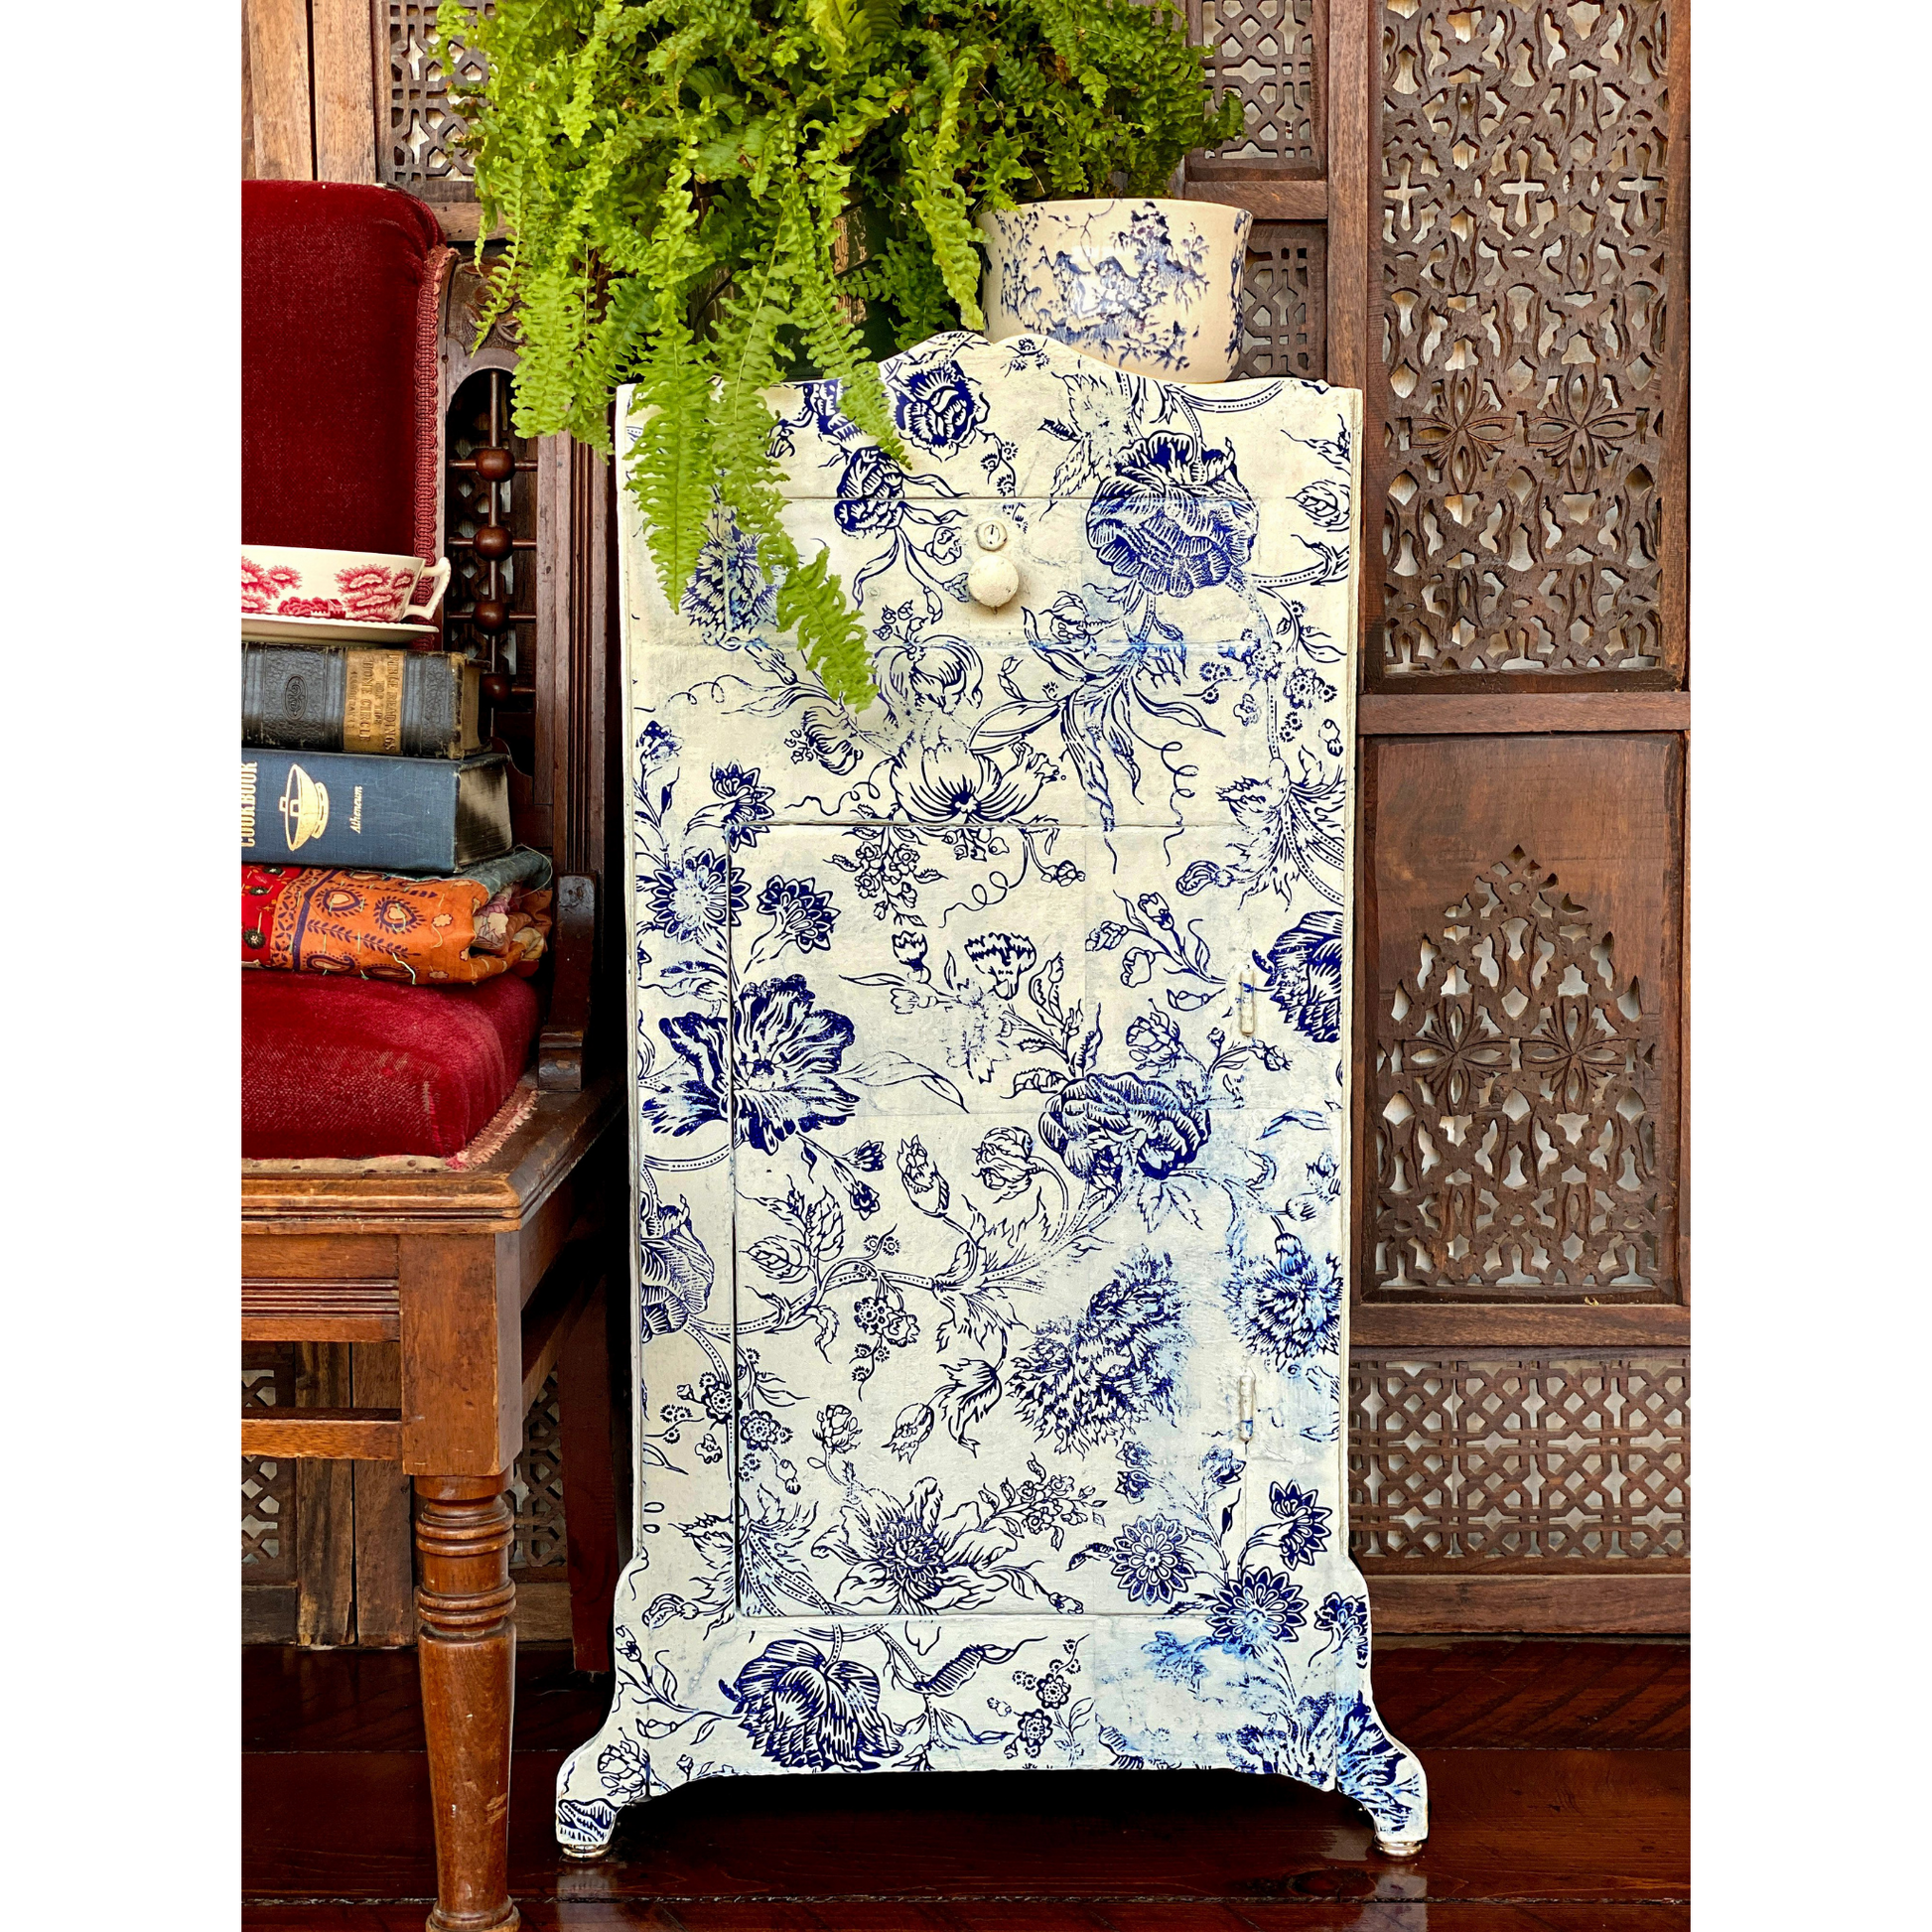 Cabinet with applied IOD Indigo Floral Paint Inlay by Iron Orchid Designs in navy and white florals. Available at Milton's Daughter.